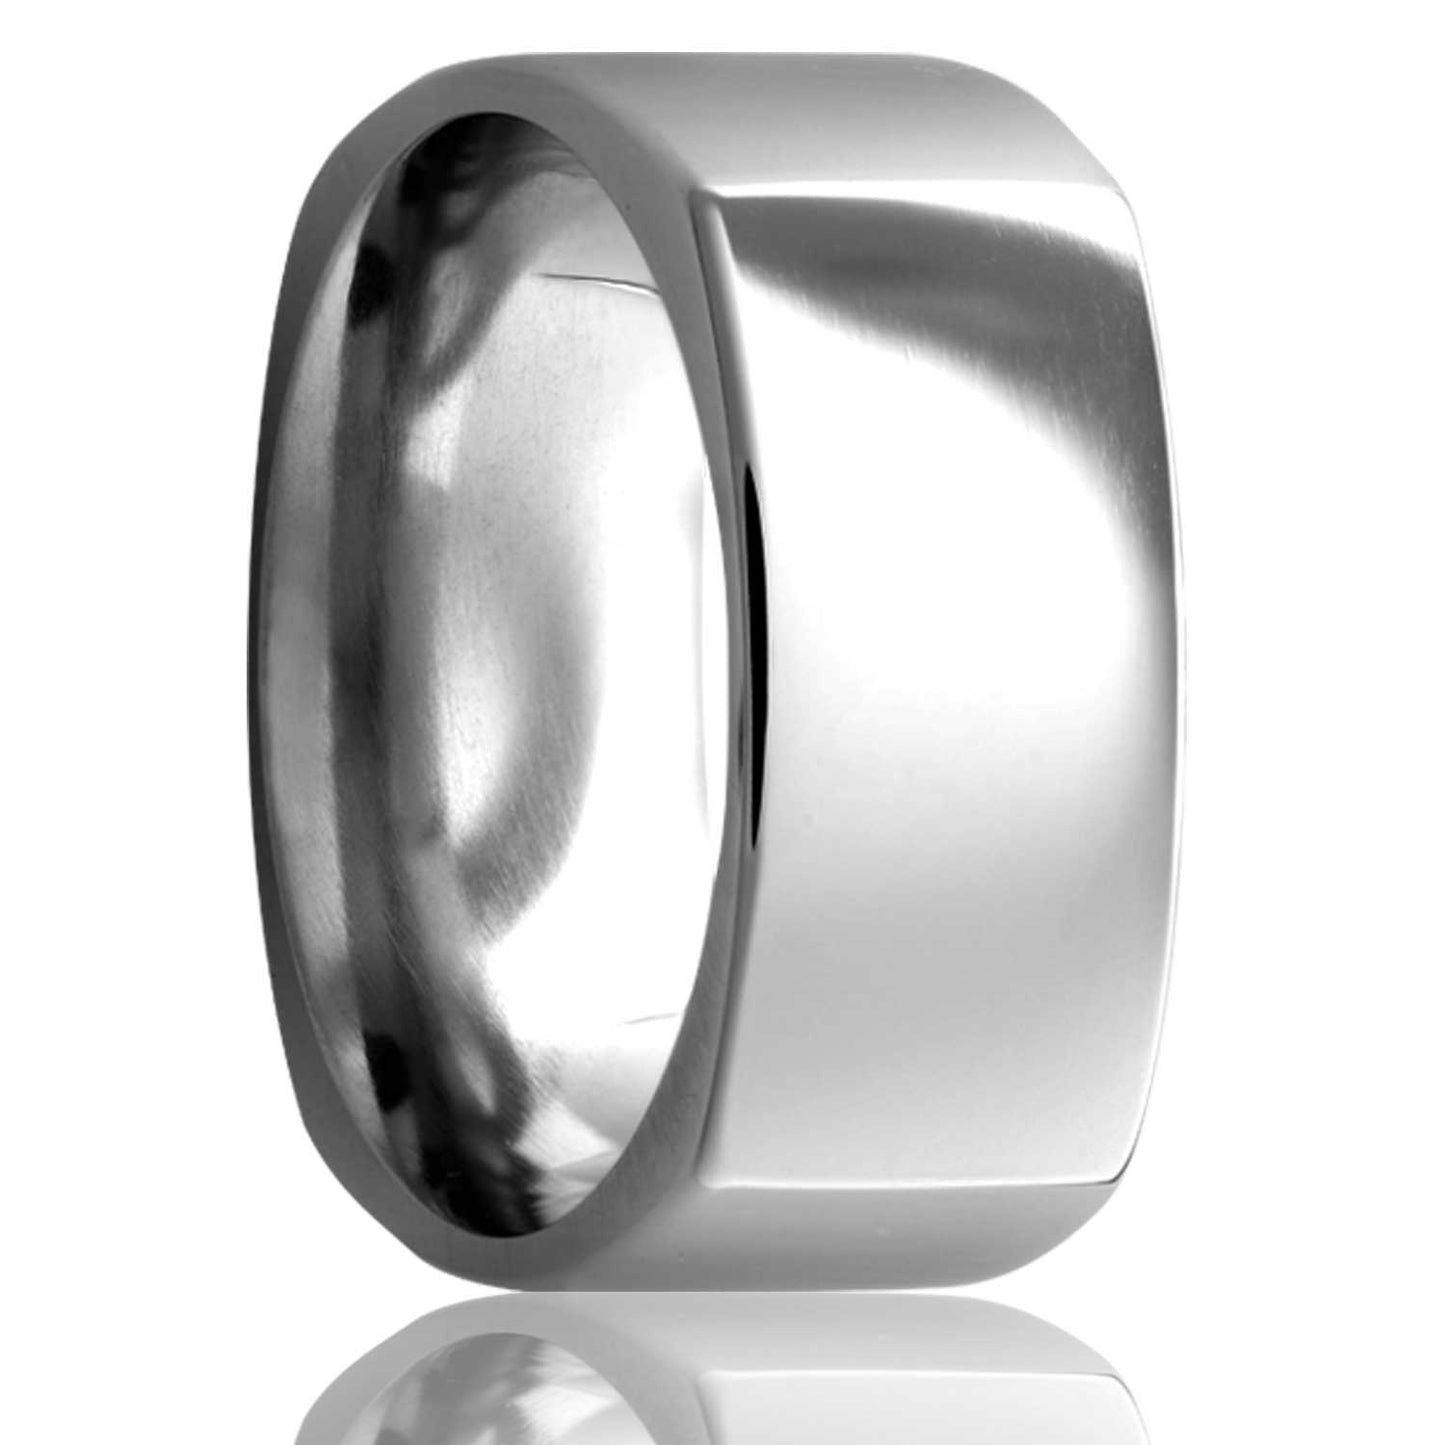 A square shaped cobalt wedding band displayed on a neutral white background.